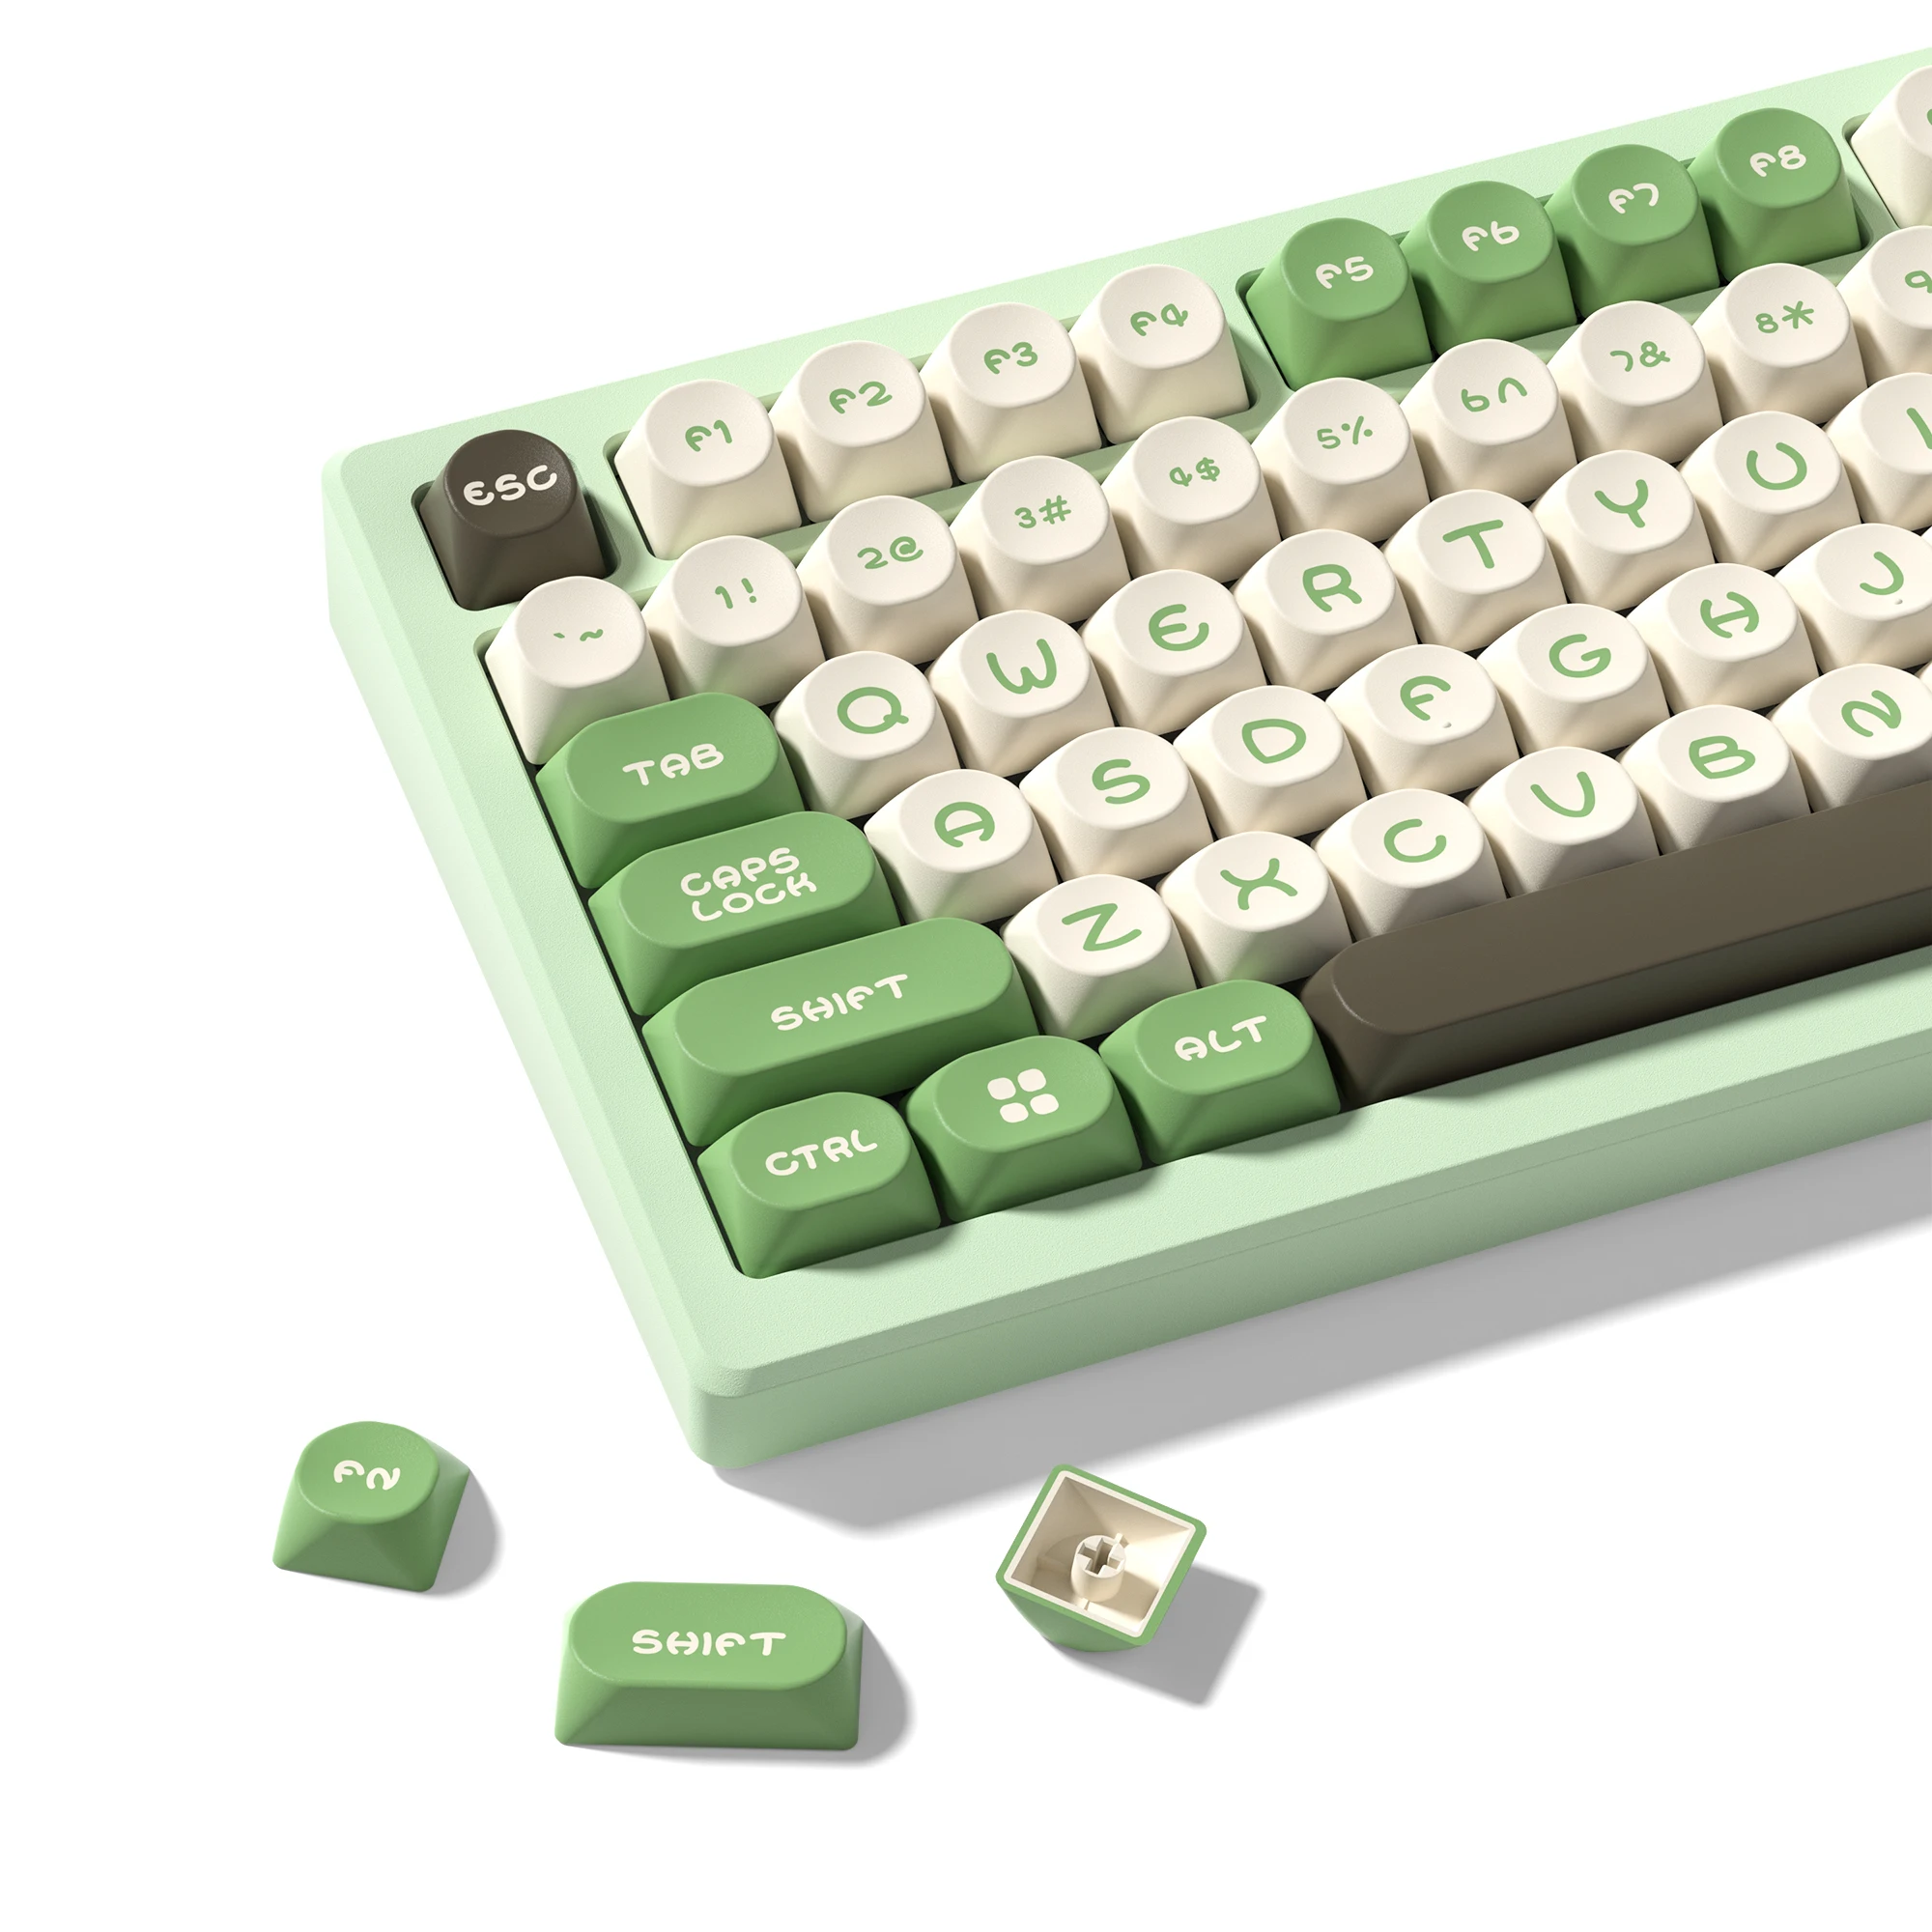 

130 Keys Green Pine MOA Profile PBT Keycaps Double Shot Key caps for 61/87/104 Cherry MX Switch Gaming Mechanical Keyboard